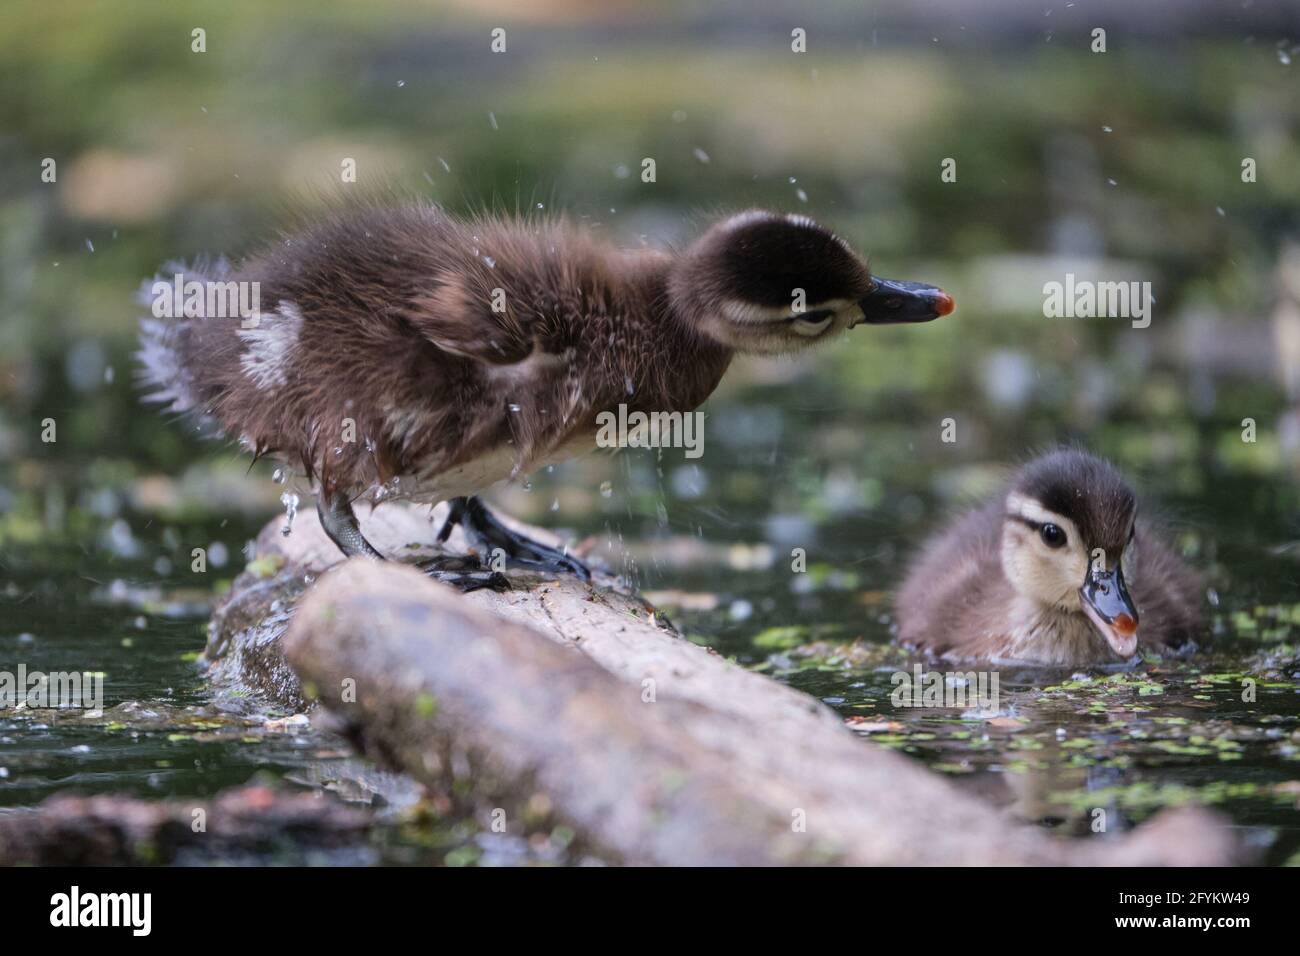 A new born Wood Duck, Aix sponsa, shakes off water from its duvet while standing on a log on one of its first expedition. The recently hatched duckling part of a brood of about ten is being watched by a sibling. Stock Photo